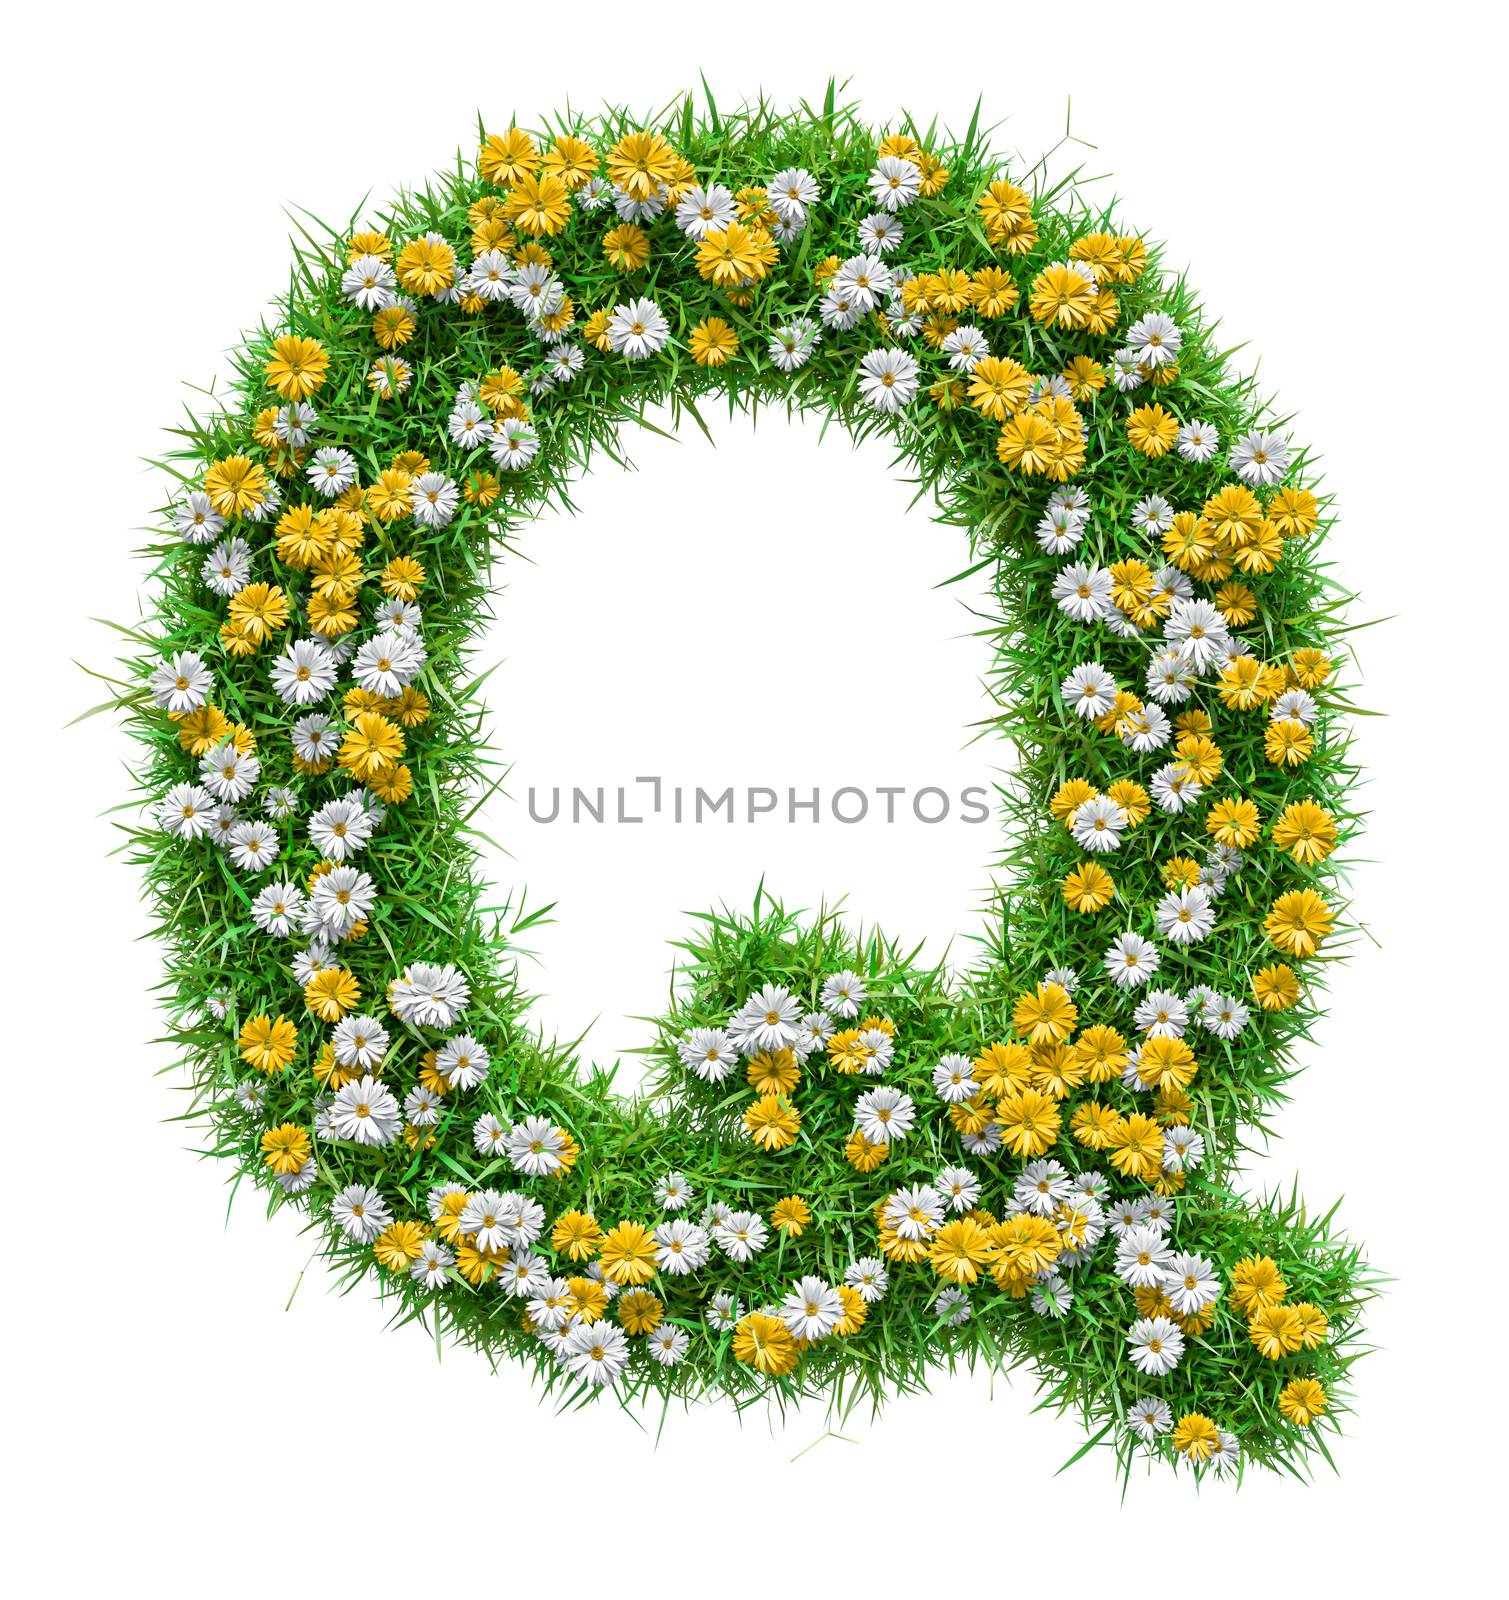 Letter Q Of Green Grass And Flowers. Isolated On White Background. Font For Your Design. 3D Illustration